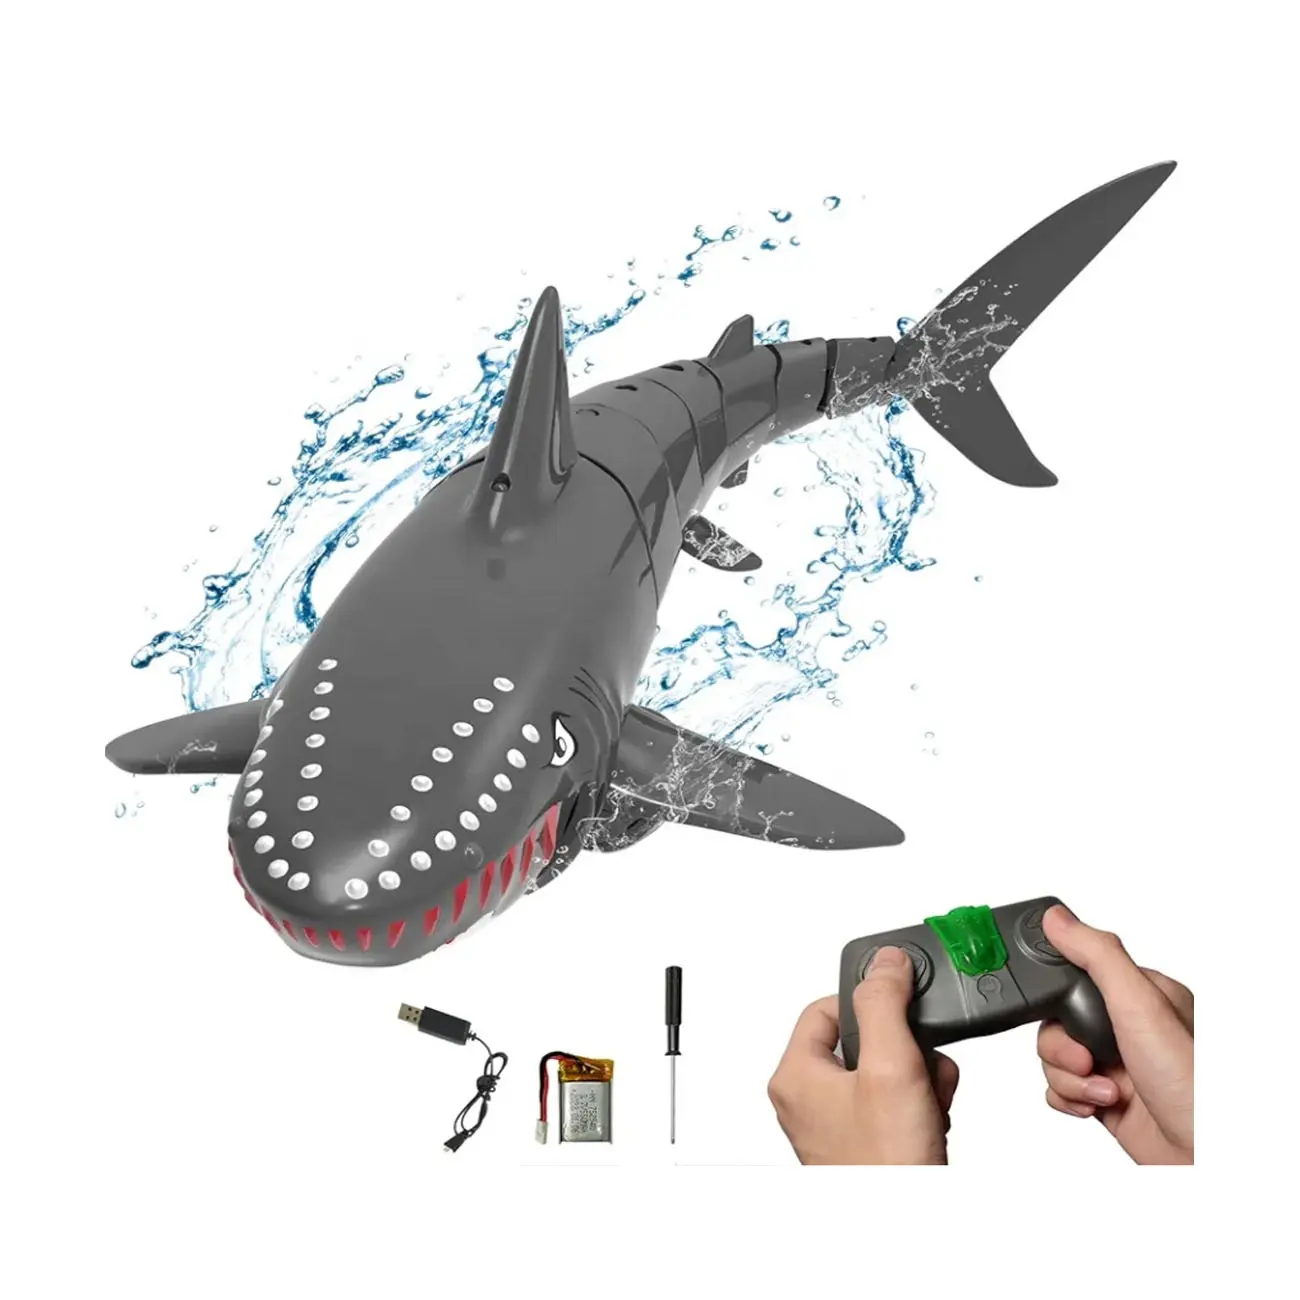 New 2.4 GHz Remote Control Shark Toy ,1:16 Scale High Simulation Shark, RC Shark for Swimming Pool, Underwater RC Boat Toy Gifts